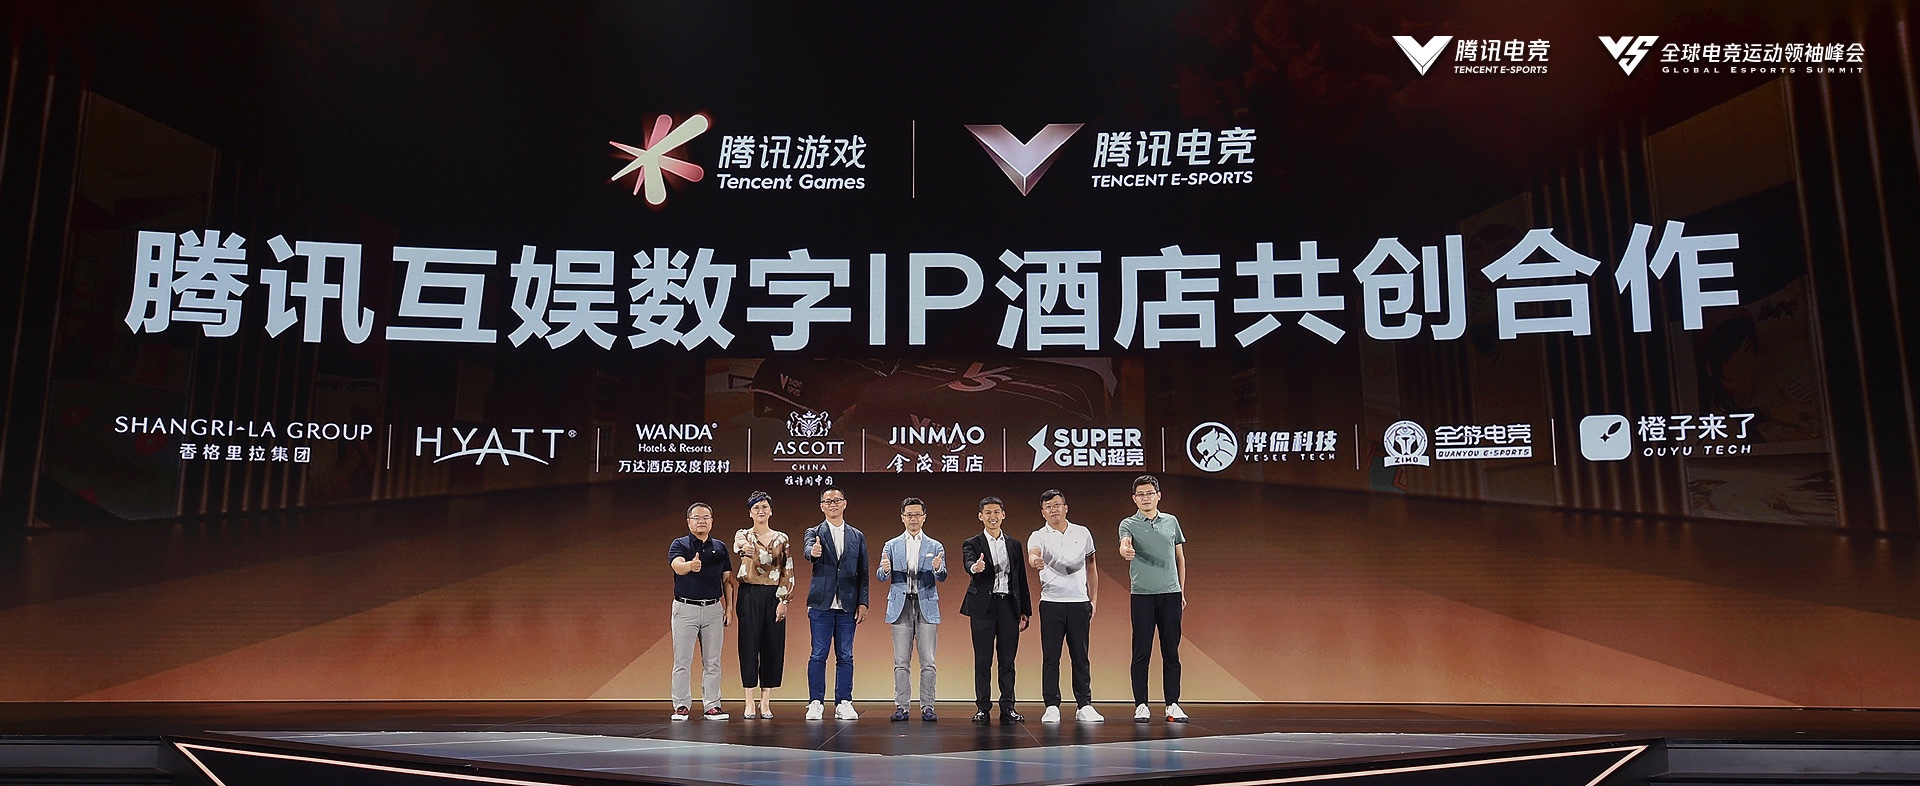 Ascot China, Tencent games and Tencent E-sports release Hotel jointly create a cooperation plan to jointly build E-sports and game IP theme rooms